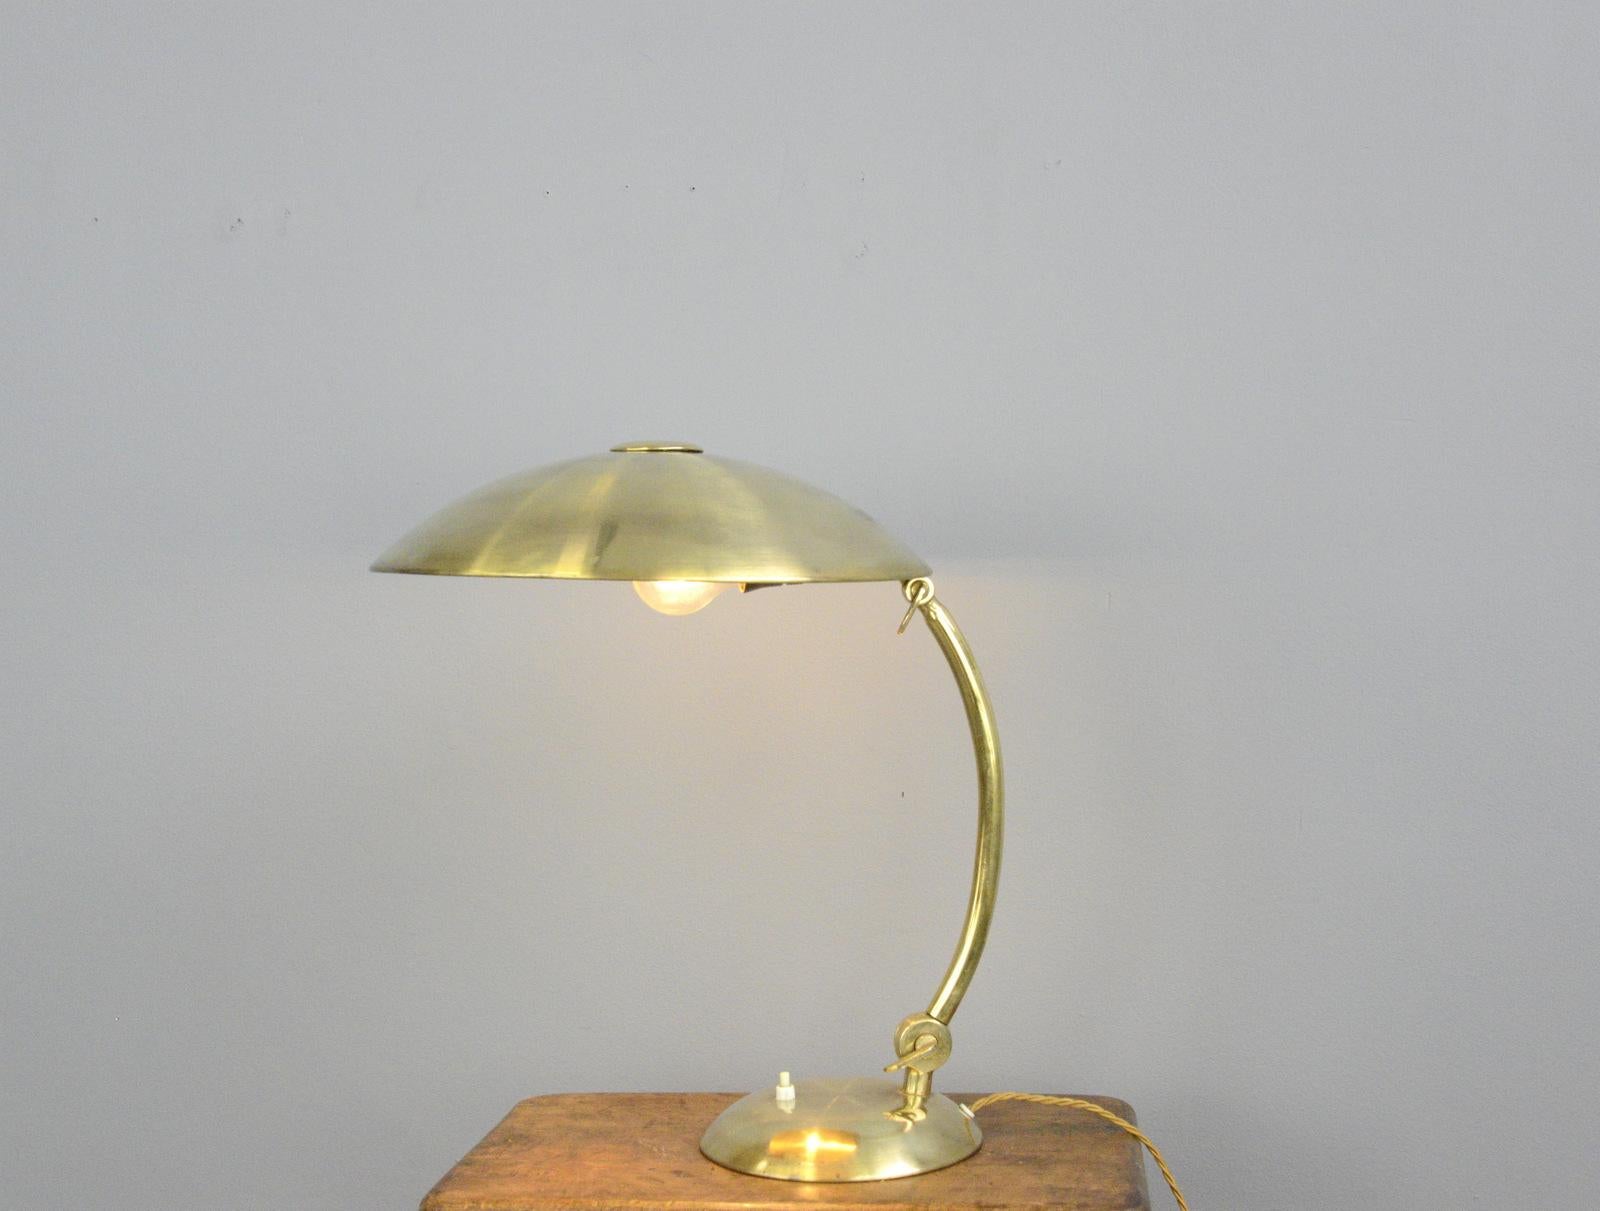 Bauhaus brass table lamp by Hillebrand, circa 1930s

- Fully brass
- Dual bulb holders
- Takes E27 fitting bulbs
- On/Off switch on the base
- Made by Hillebrand
- German, 1930s
- Size: 44cm tall x 36cm wide x 42cm